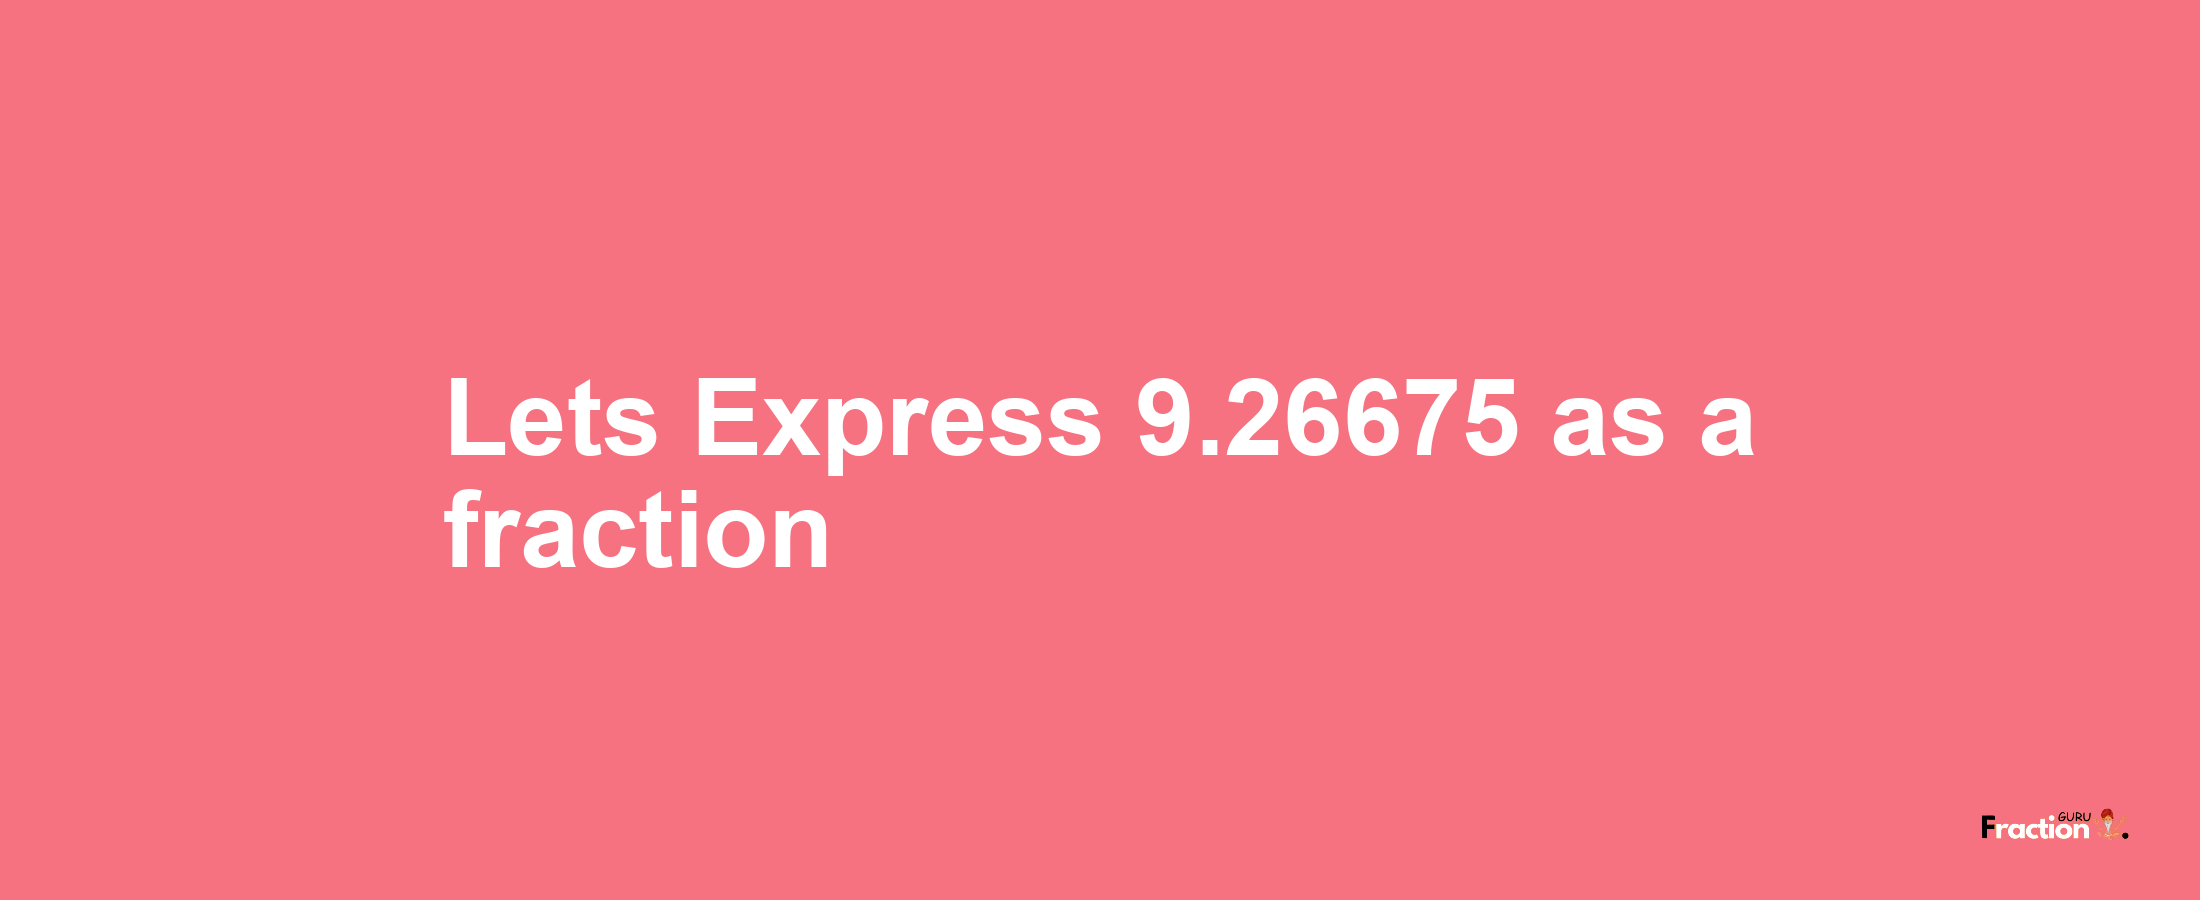 Lets Express 9.26675 as afraction